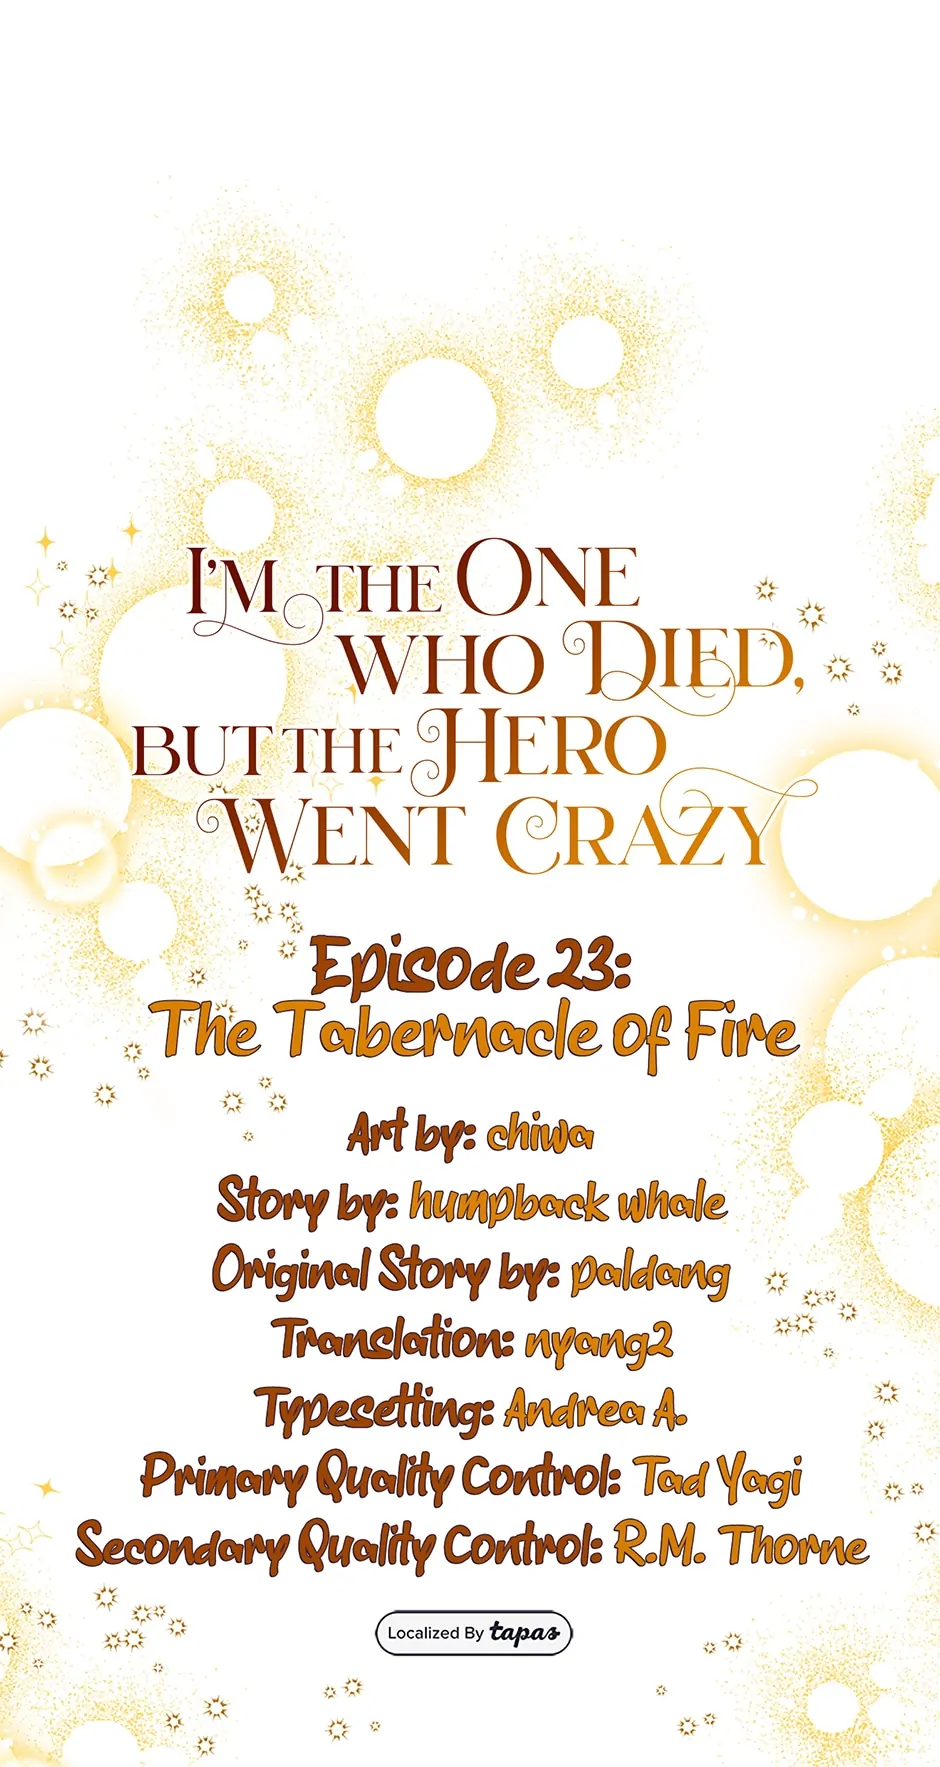 The Hero Went Crazy Even Though I’m the One Who Died chapter 23